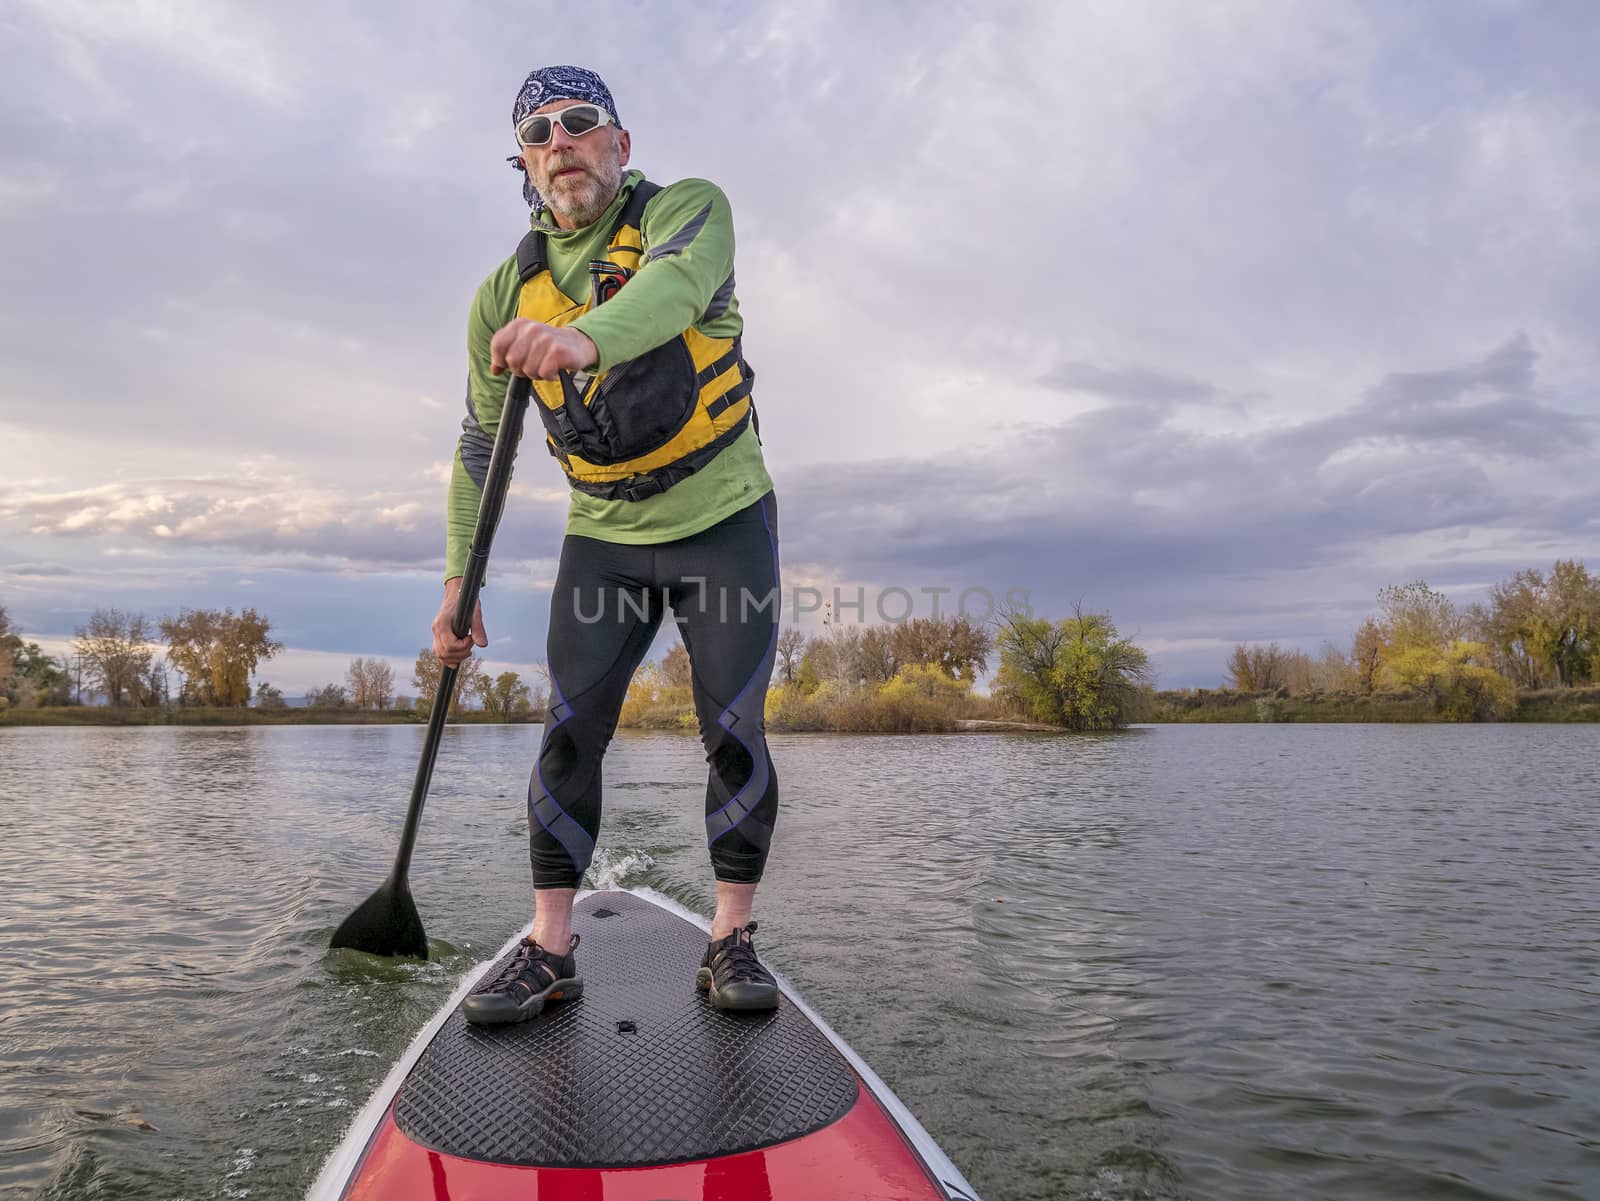 senior paddler in life jacket enjoying stand up paddling on lake, fall scenery in Fort Collins, Colorado